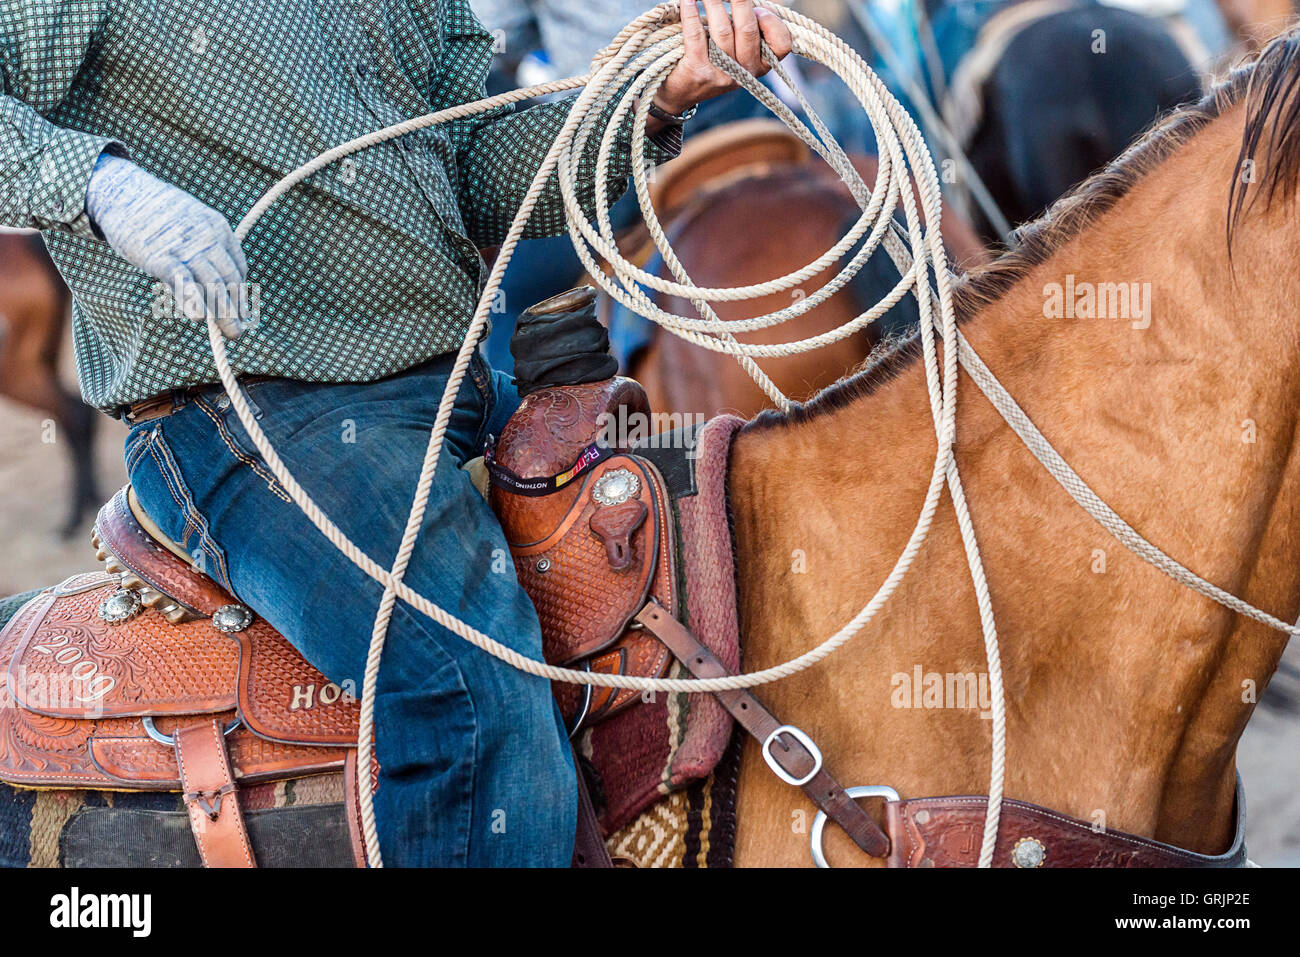 Close up image of a cowboy preparing his lasso whilst on his horse at the rodeo Stock Photo